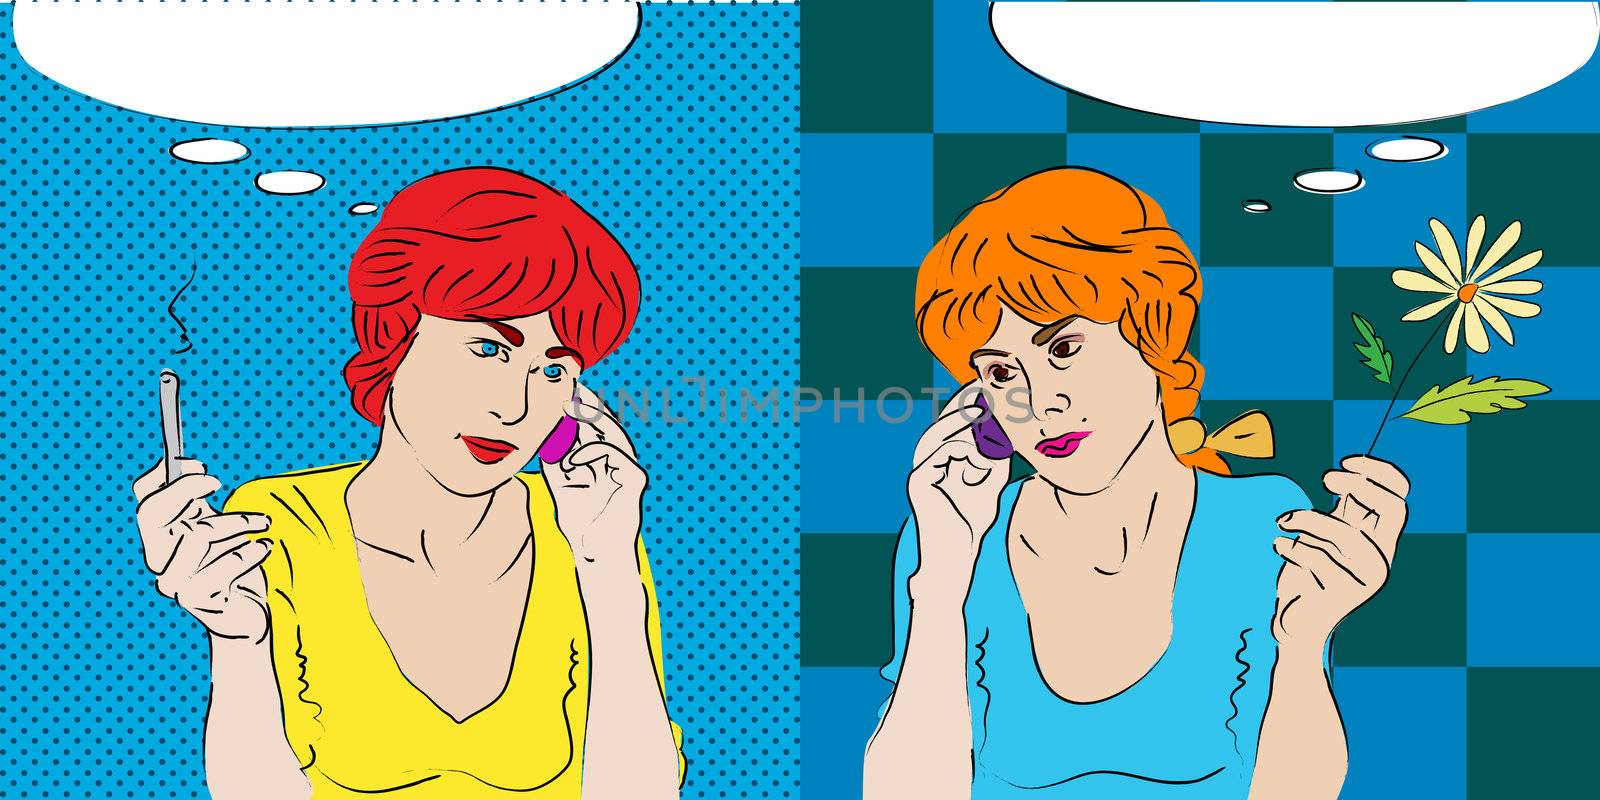 the good and the bad twins talking on the phone, gemini horoscope sign pop art composition 